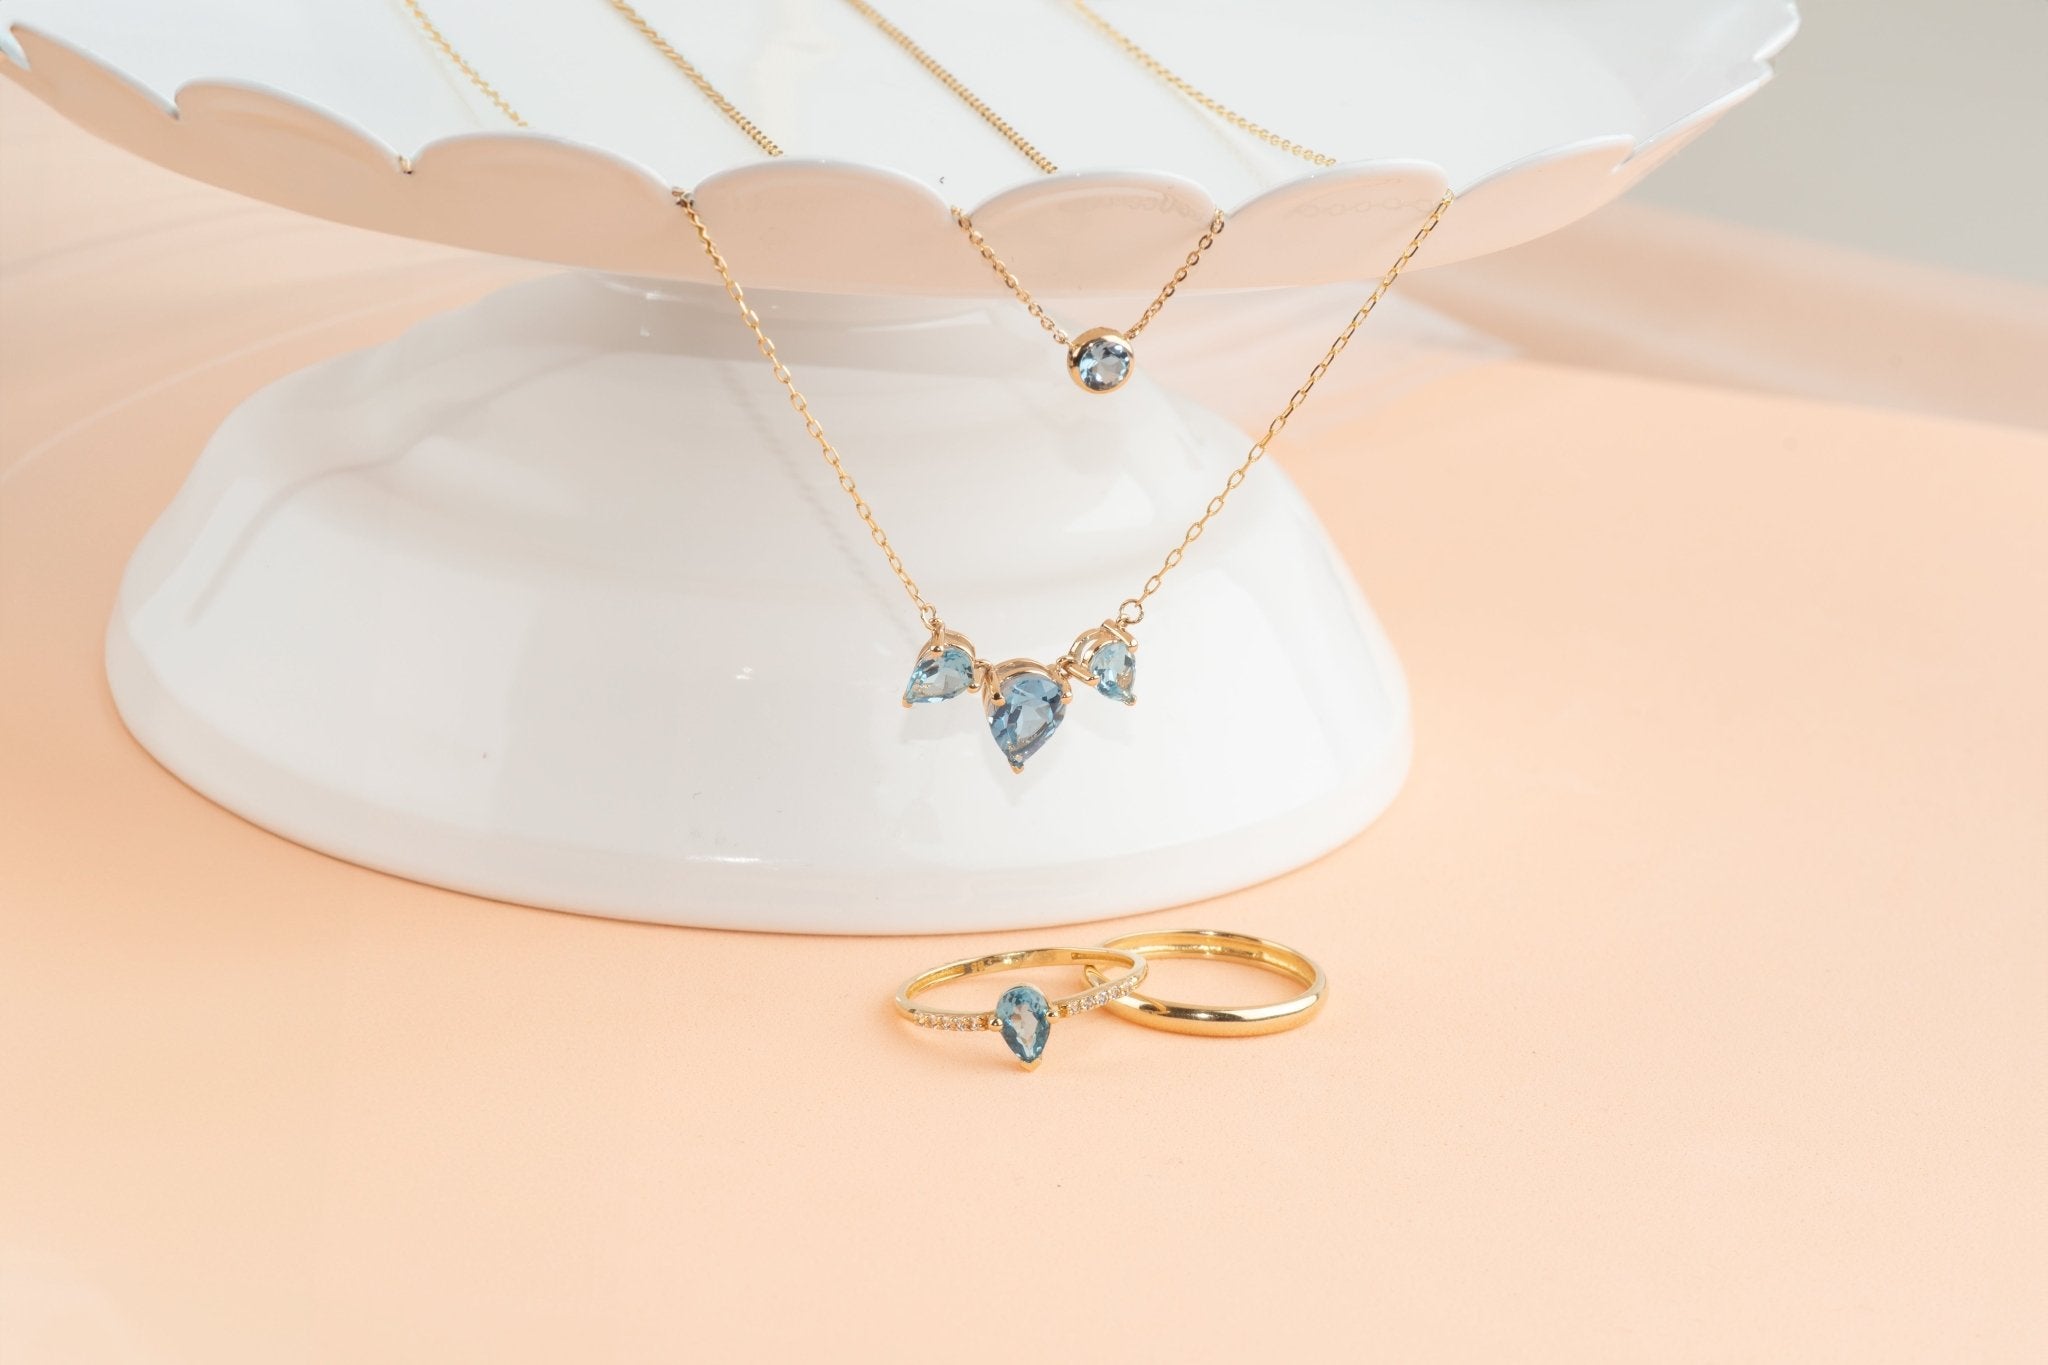 Teardrop Shaped Swiss Blue Topaz Necklace Necklaces Estella Collection #product_description# 32710 Layering Necklace Made to Order Pendant Necklace #tag4# #tag5# #tag6# #tag7# #tag8# #tag9# #tag10#